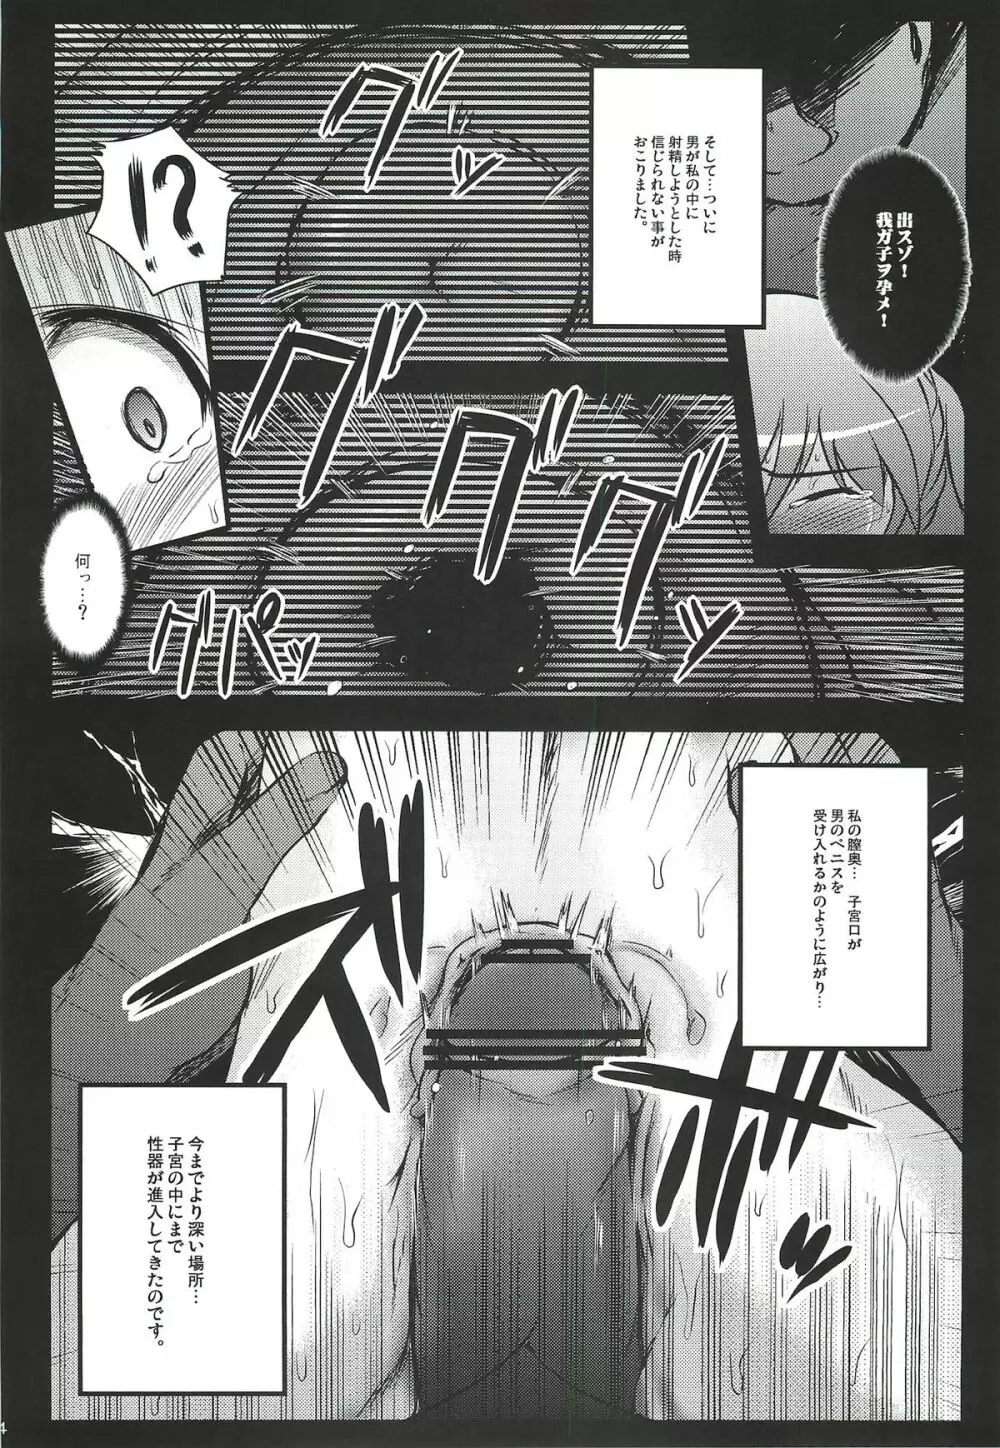 X Report -Ep1.覚醒- - page23